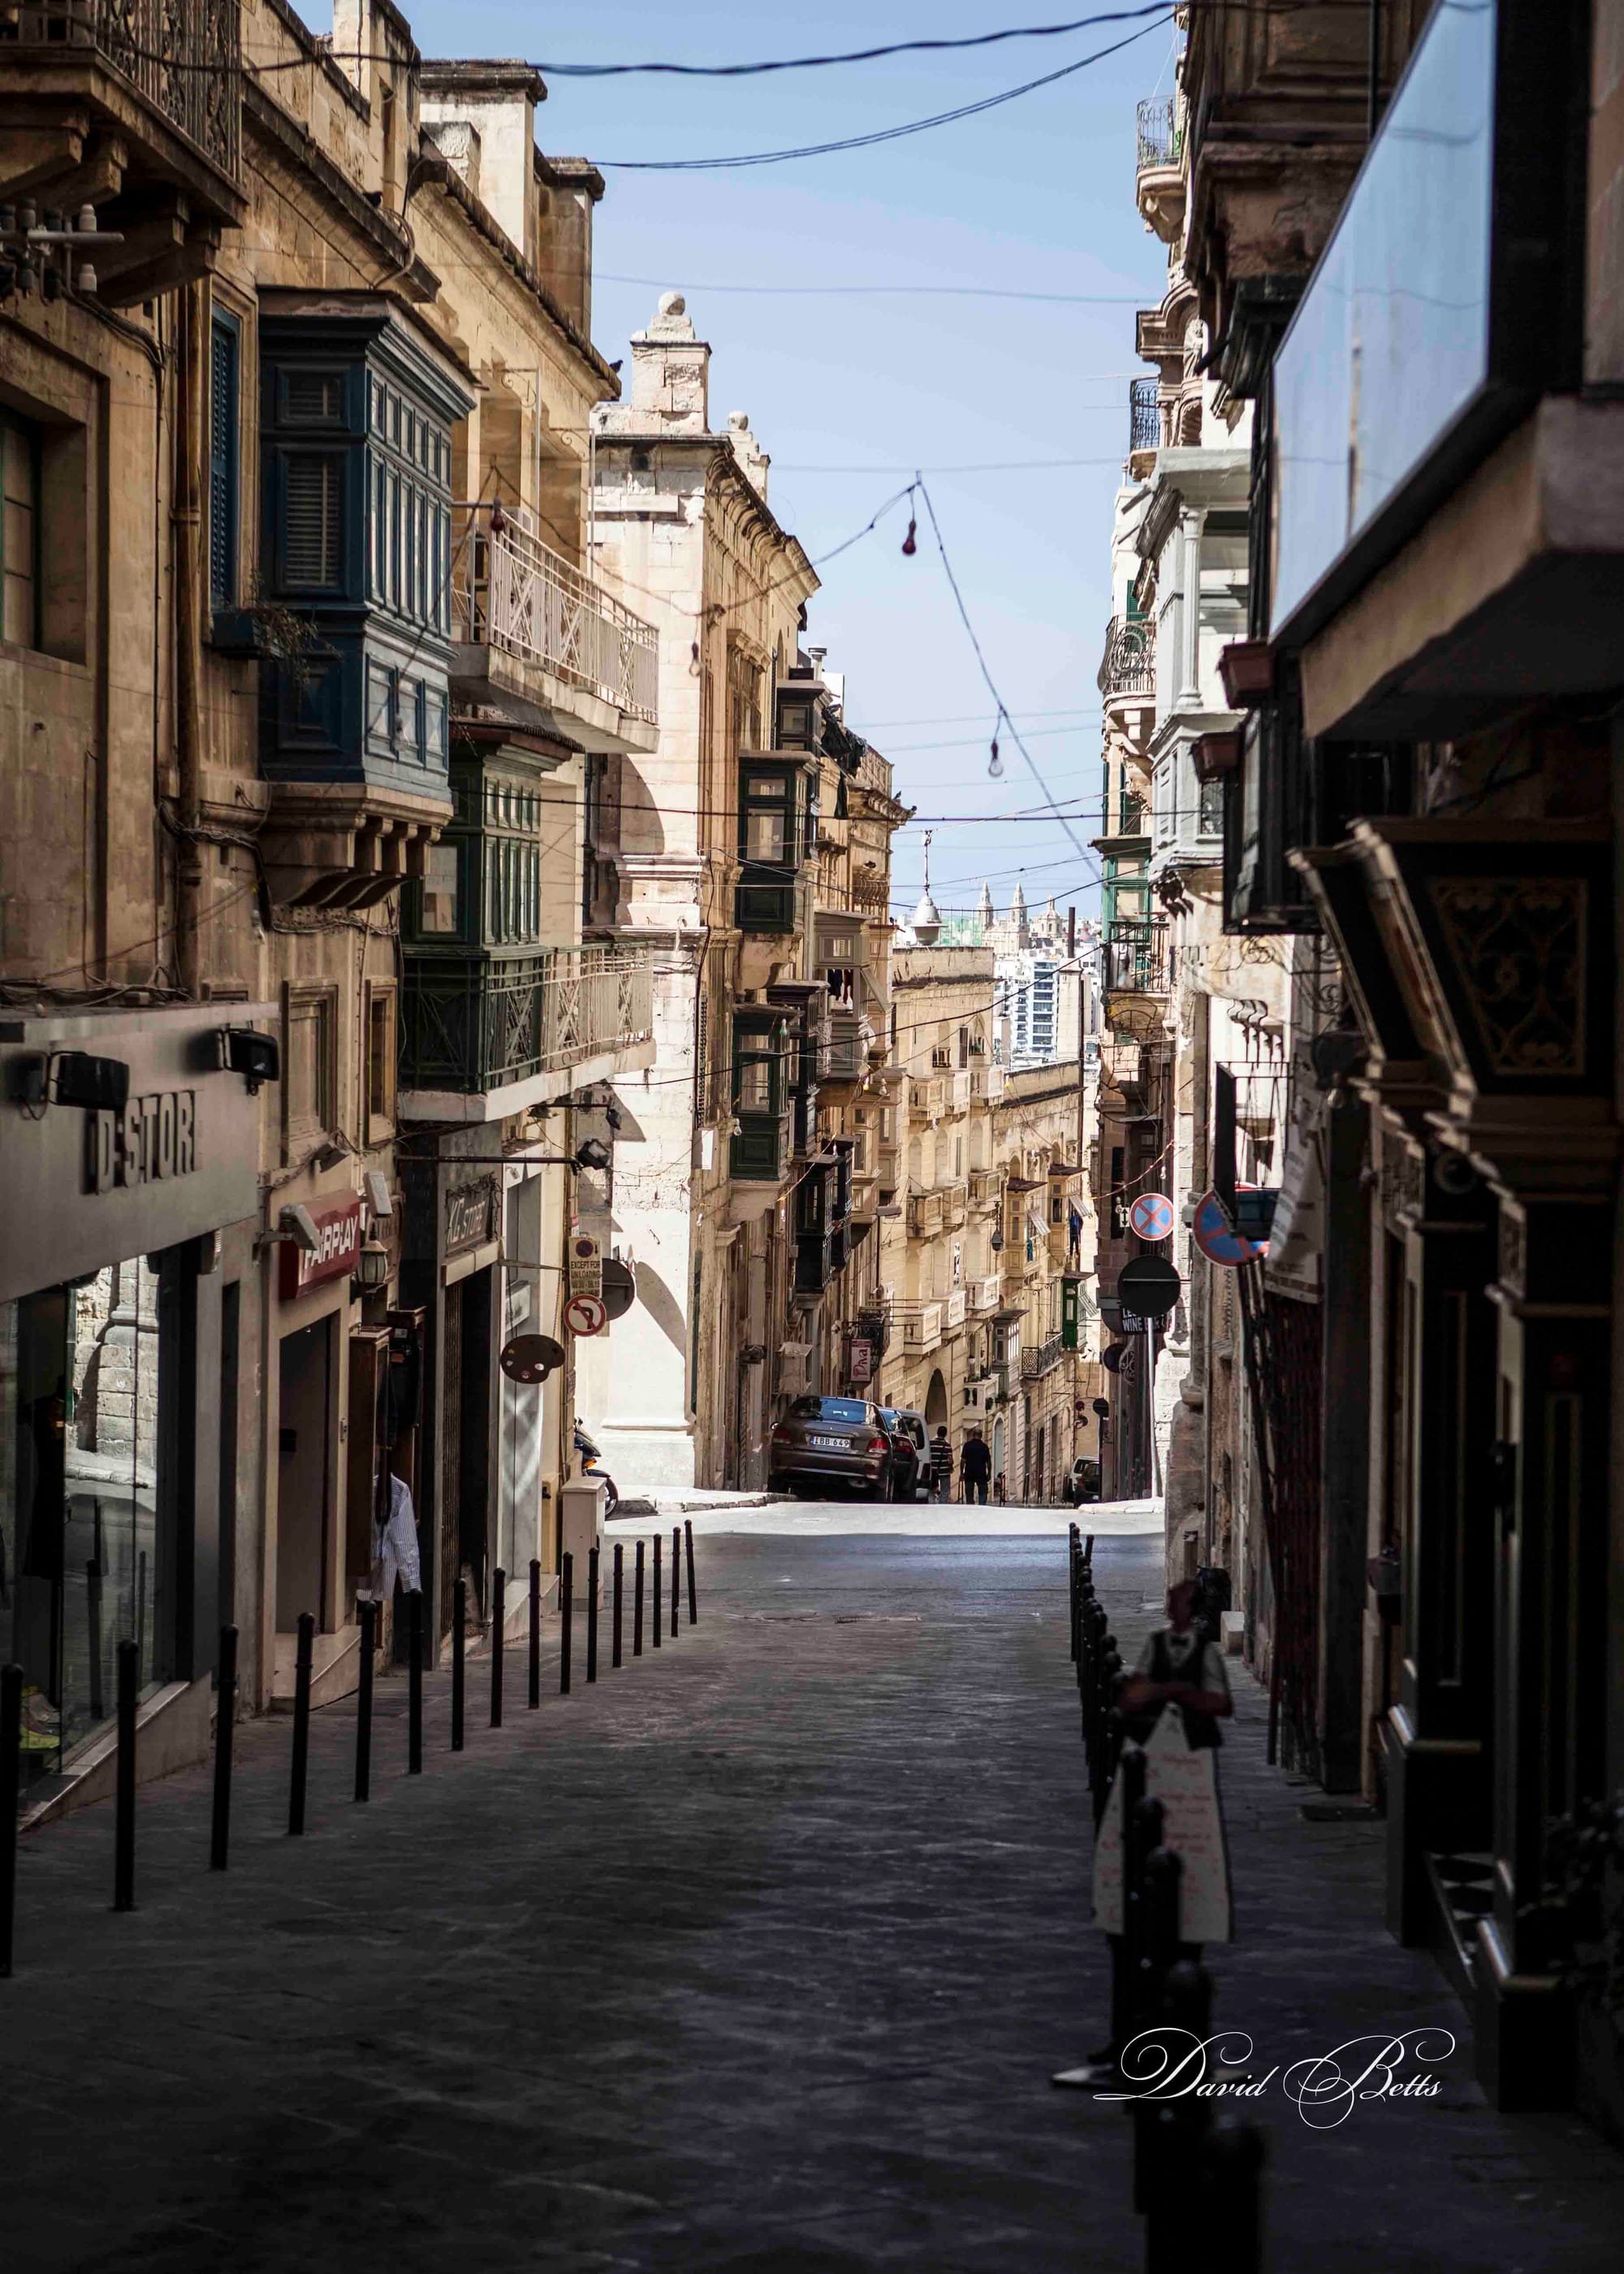 The Streets of Valetta